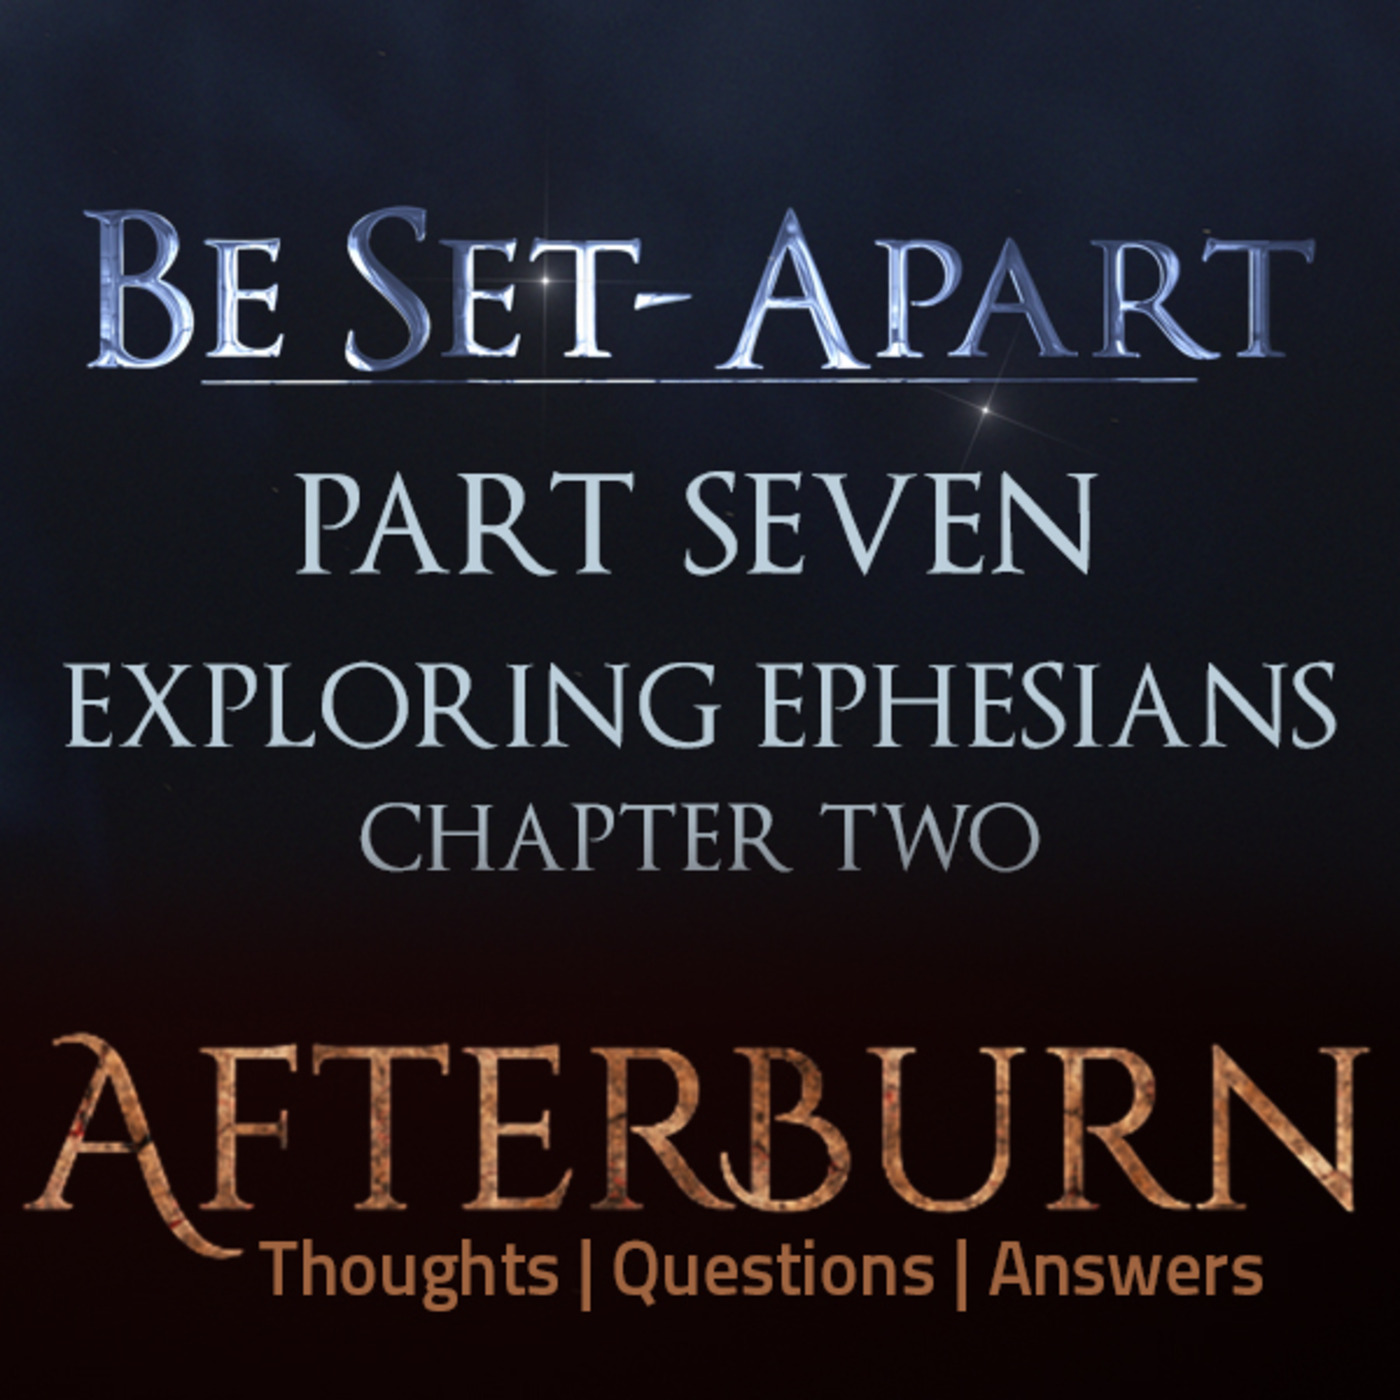 Episode 768: Afterburn | Thoughts, Q&A on Be Set-Apart | Part Seven | Exploring Ephesians Chapter Two